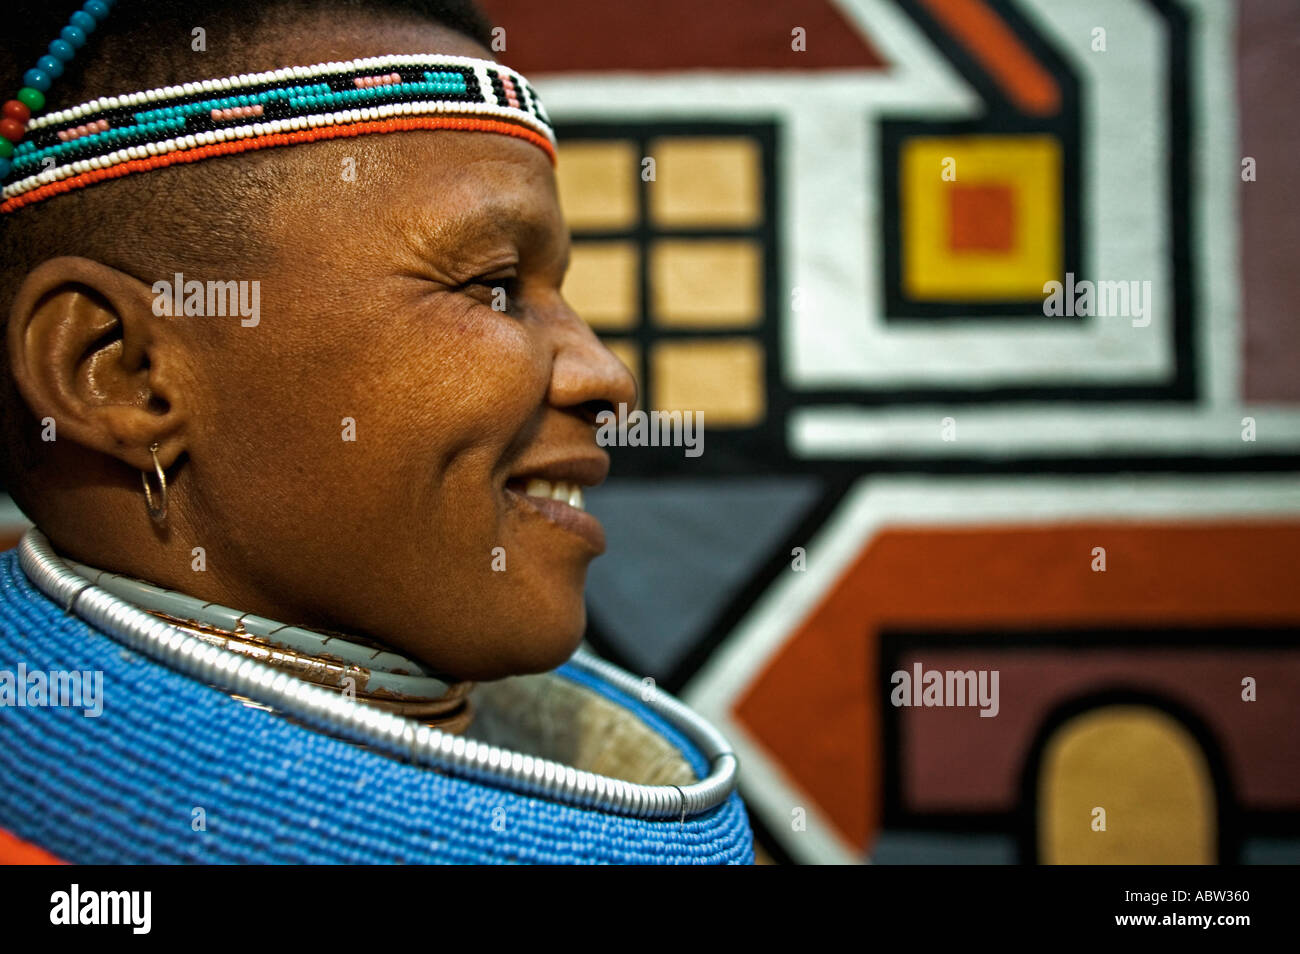 Ndebele woman in traditional costume with Traditional geometric wall paintings of Ndebele village Model released South Africa Stock Photo